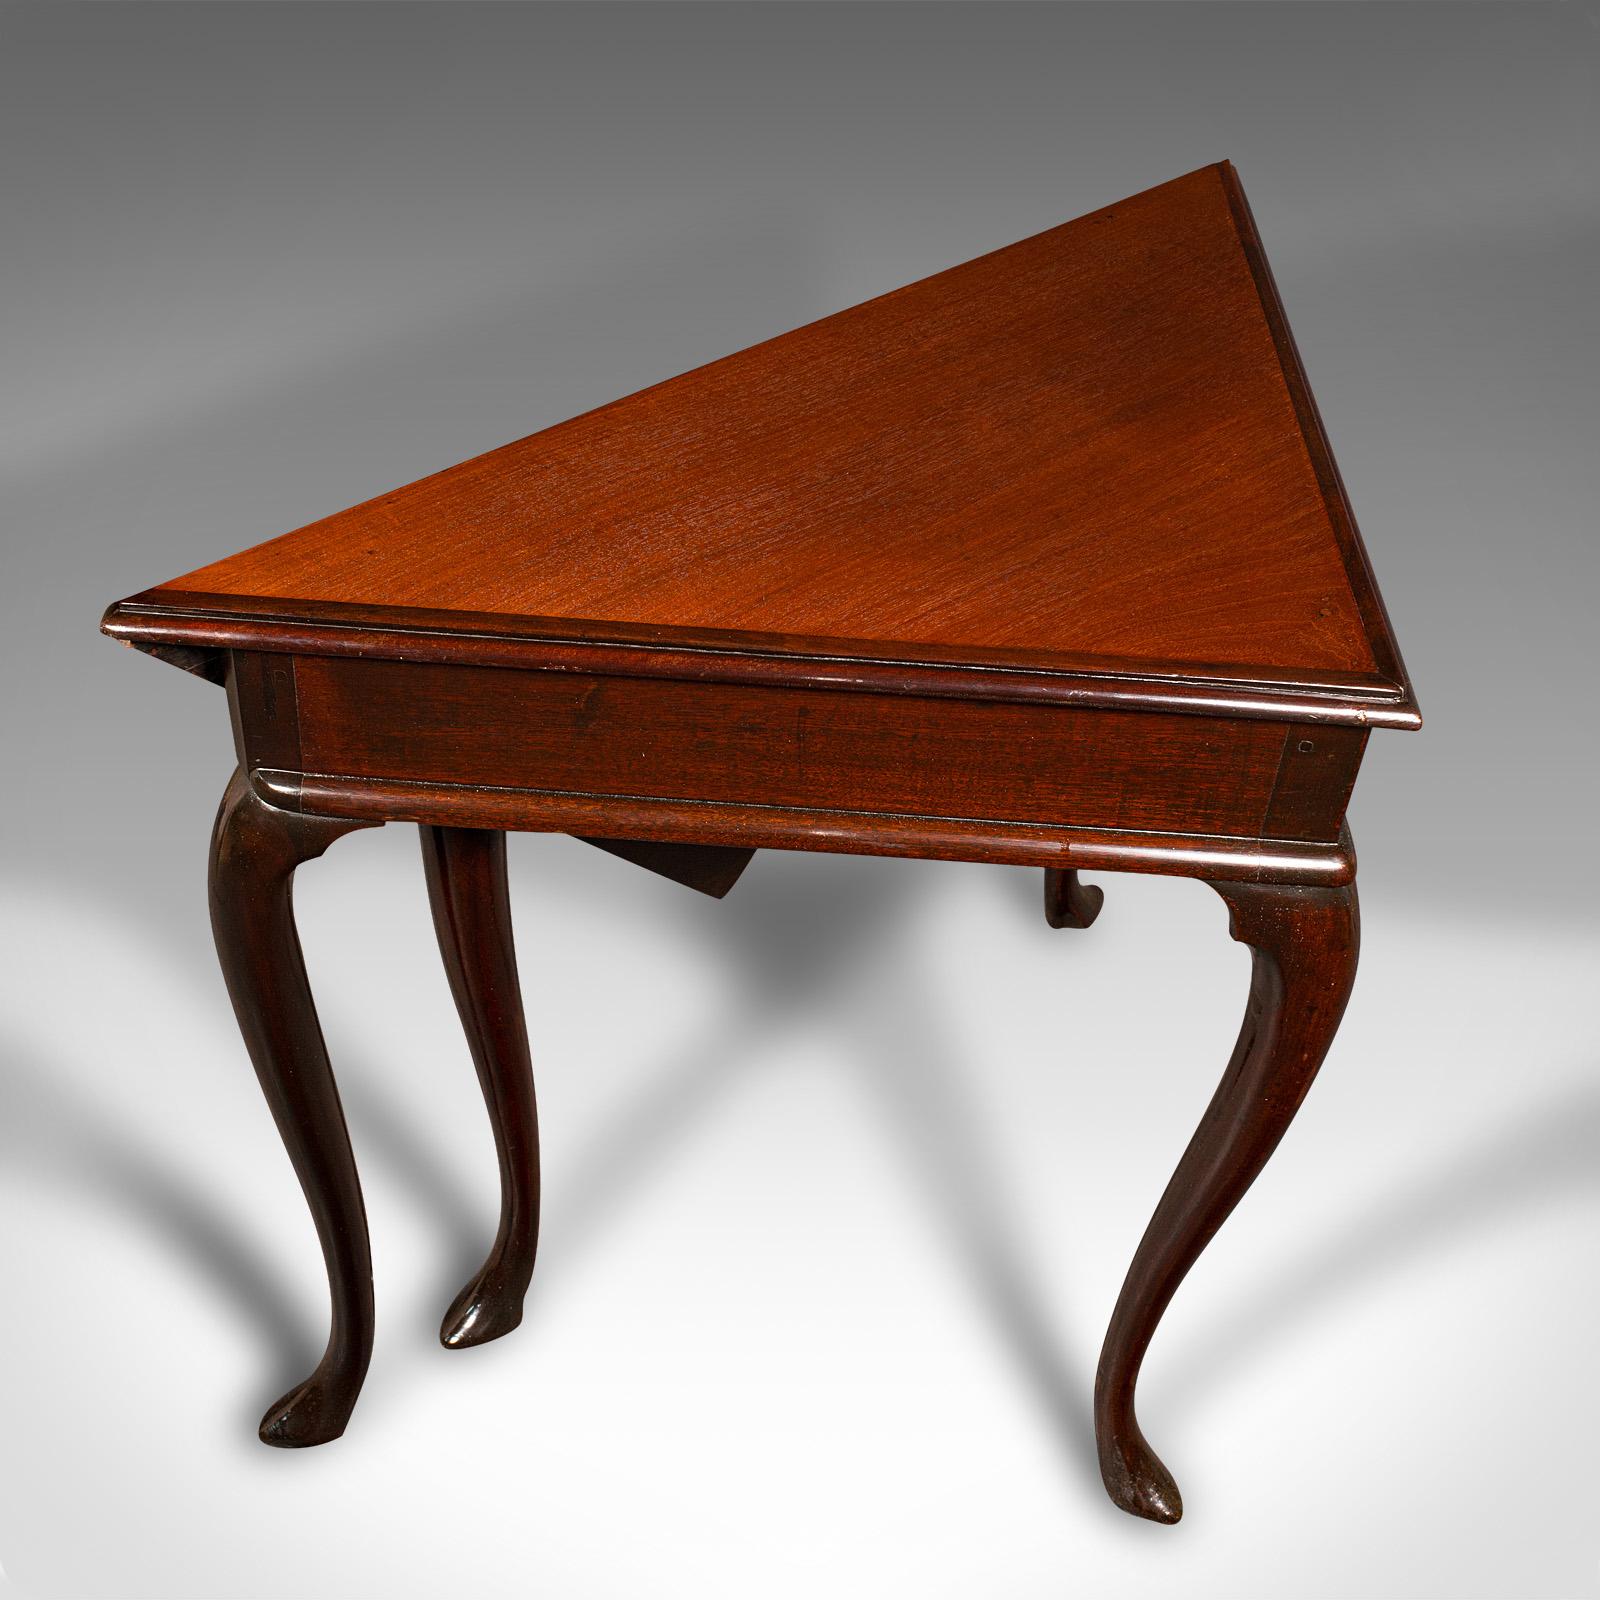 Antique Supper Table, English, Folding, Occasional, Display, Georgian, C.1770 For Sale 1